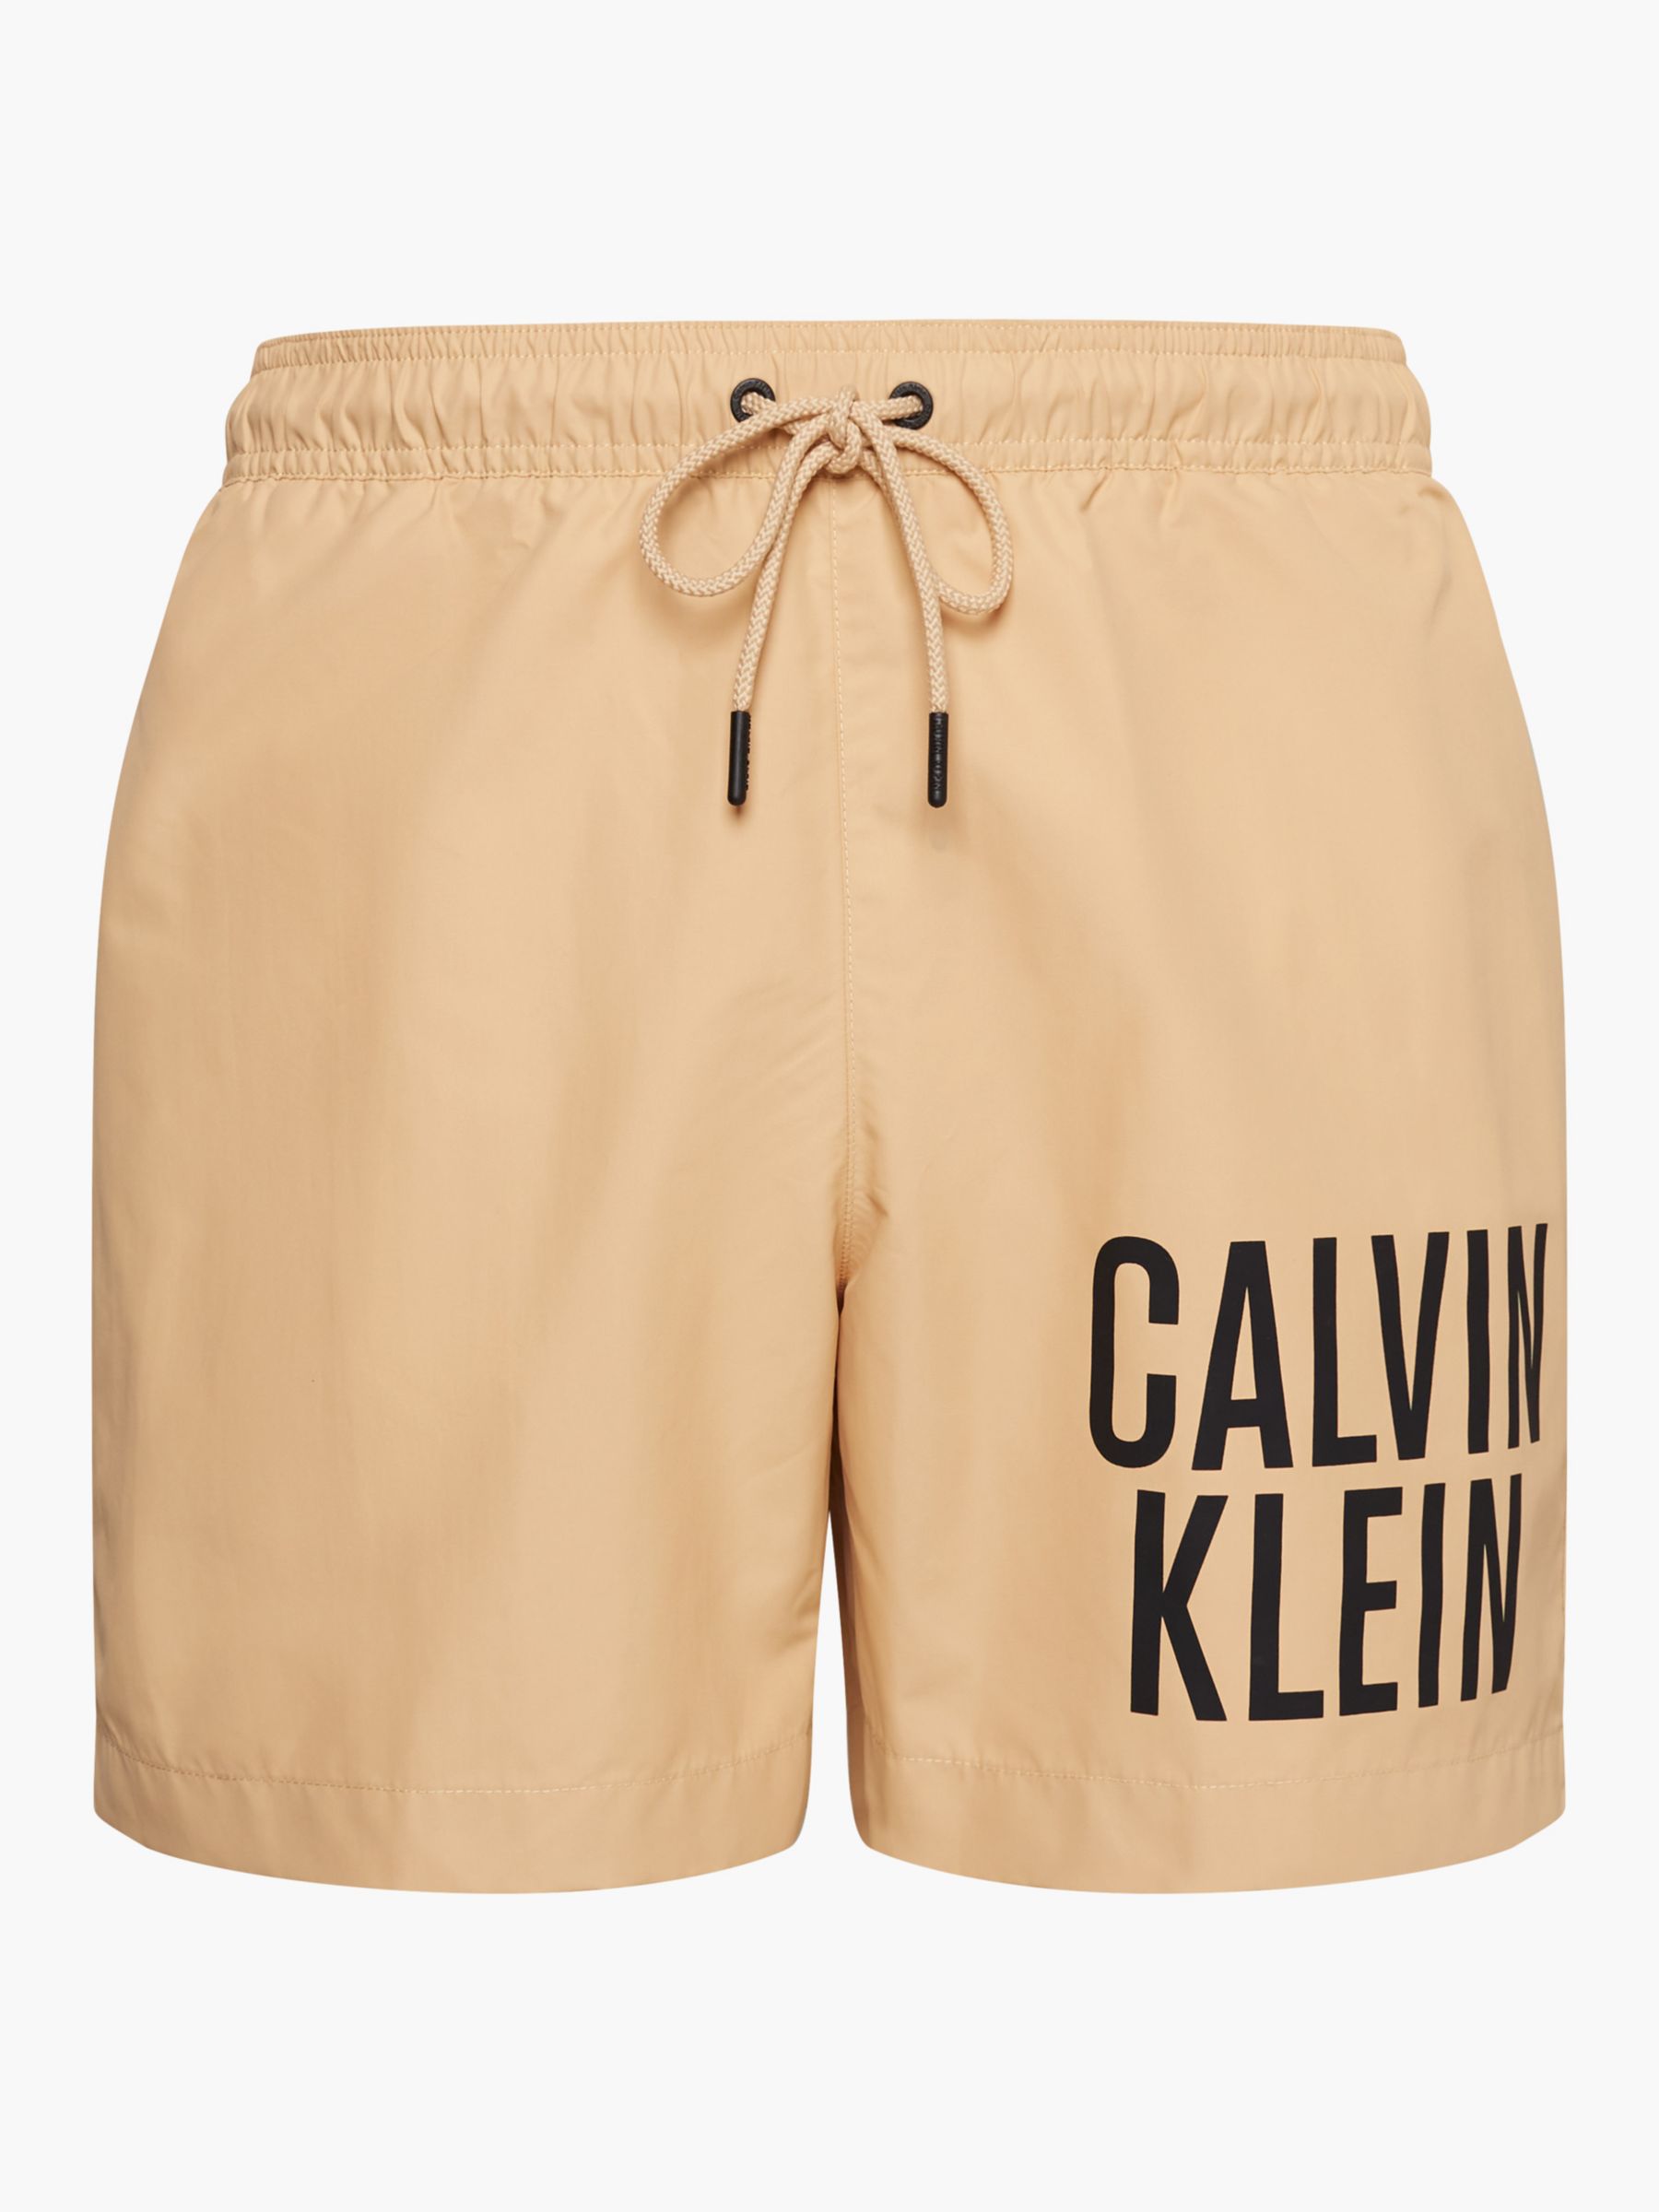 Calvin Klein Intense Power Recycled Poly Swim Shorts, Sunday Pastry, S